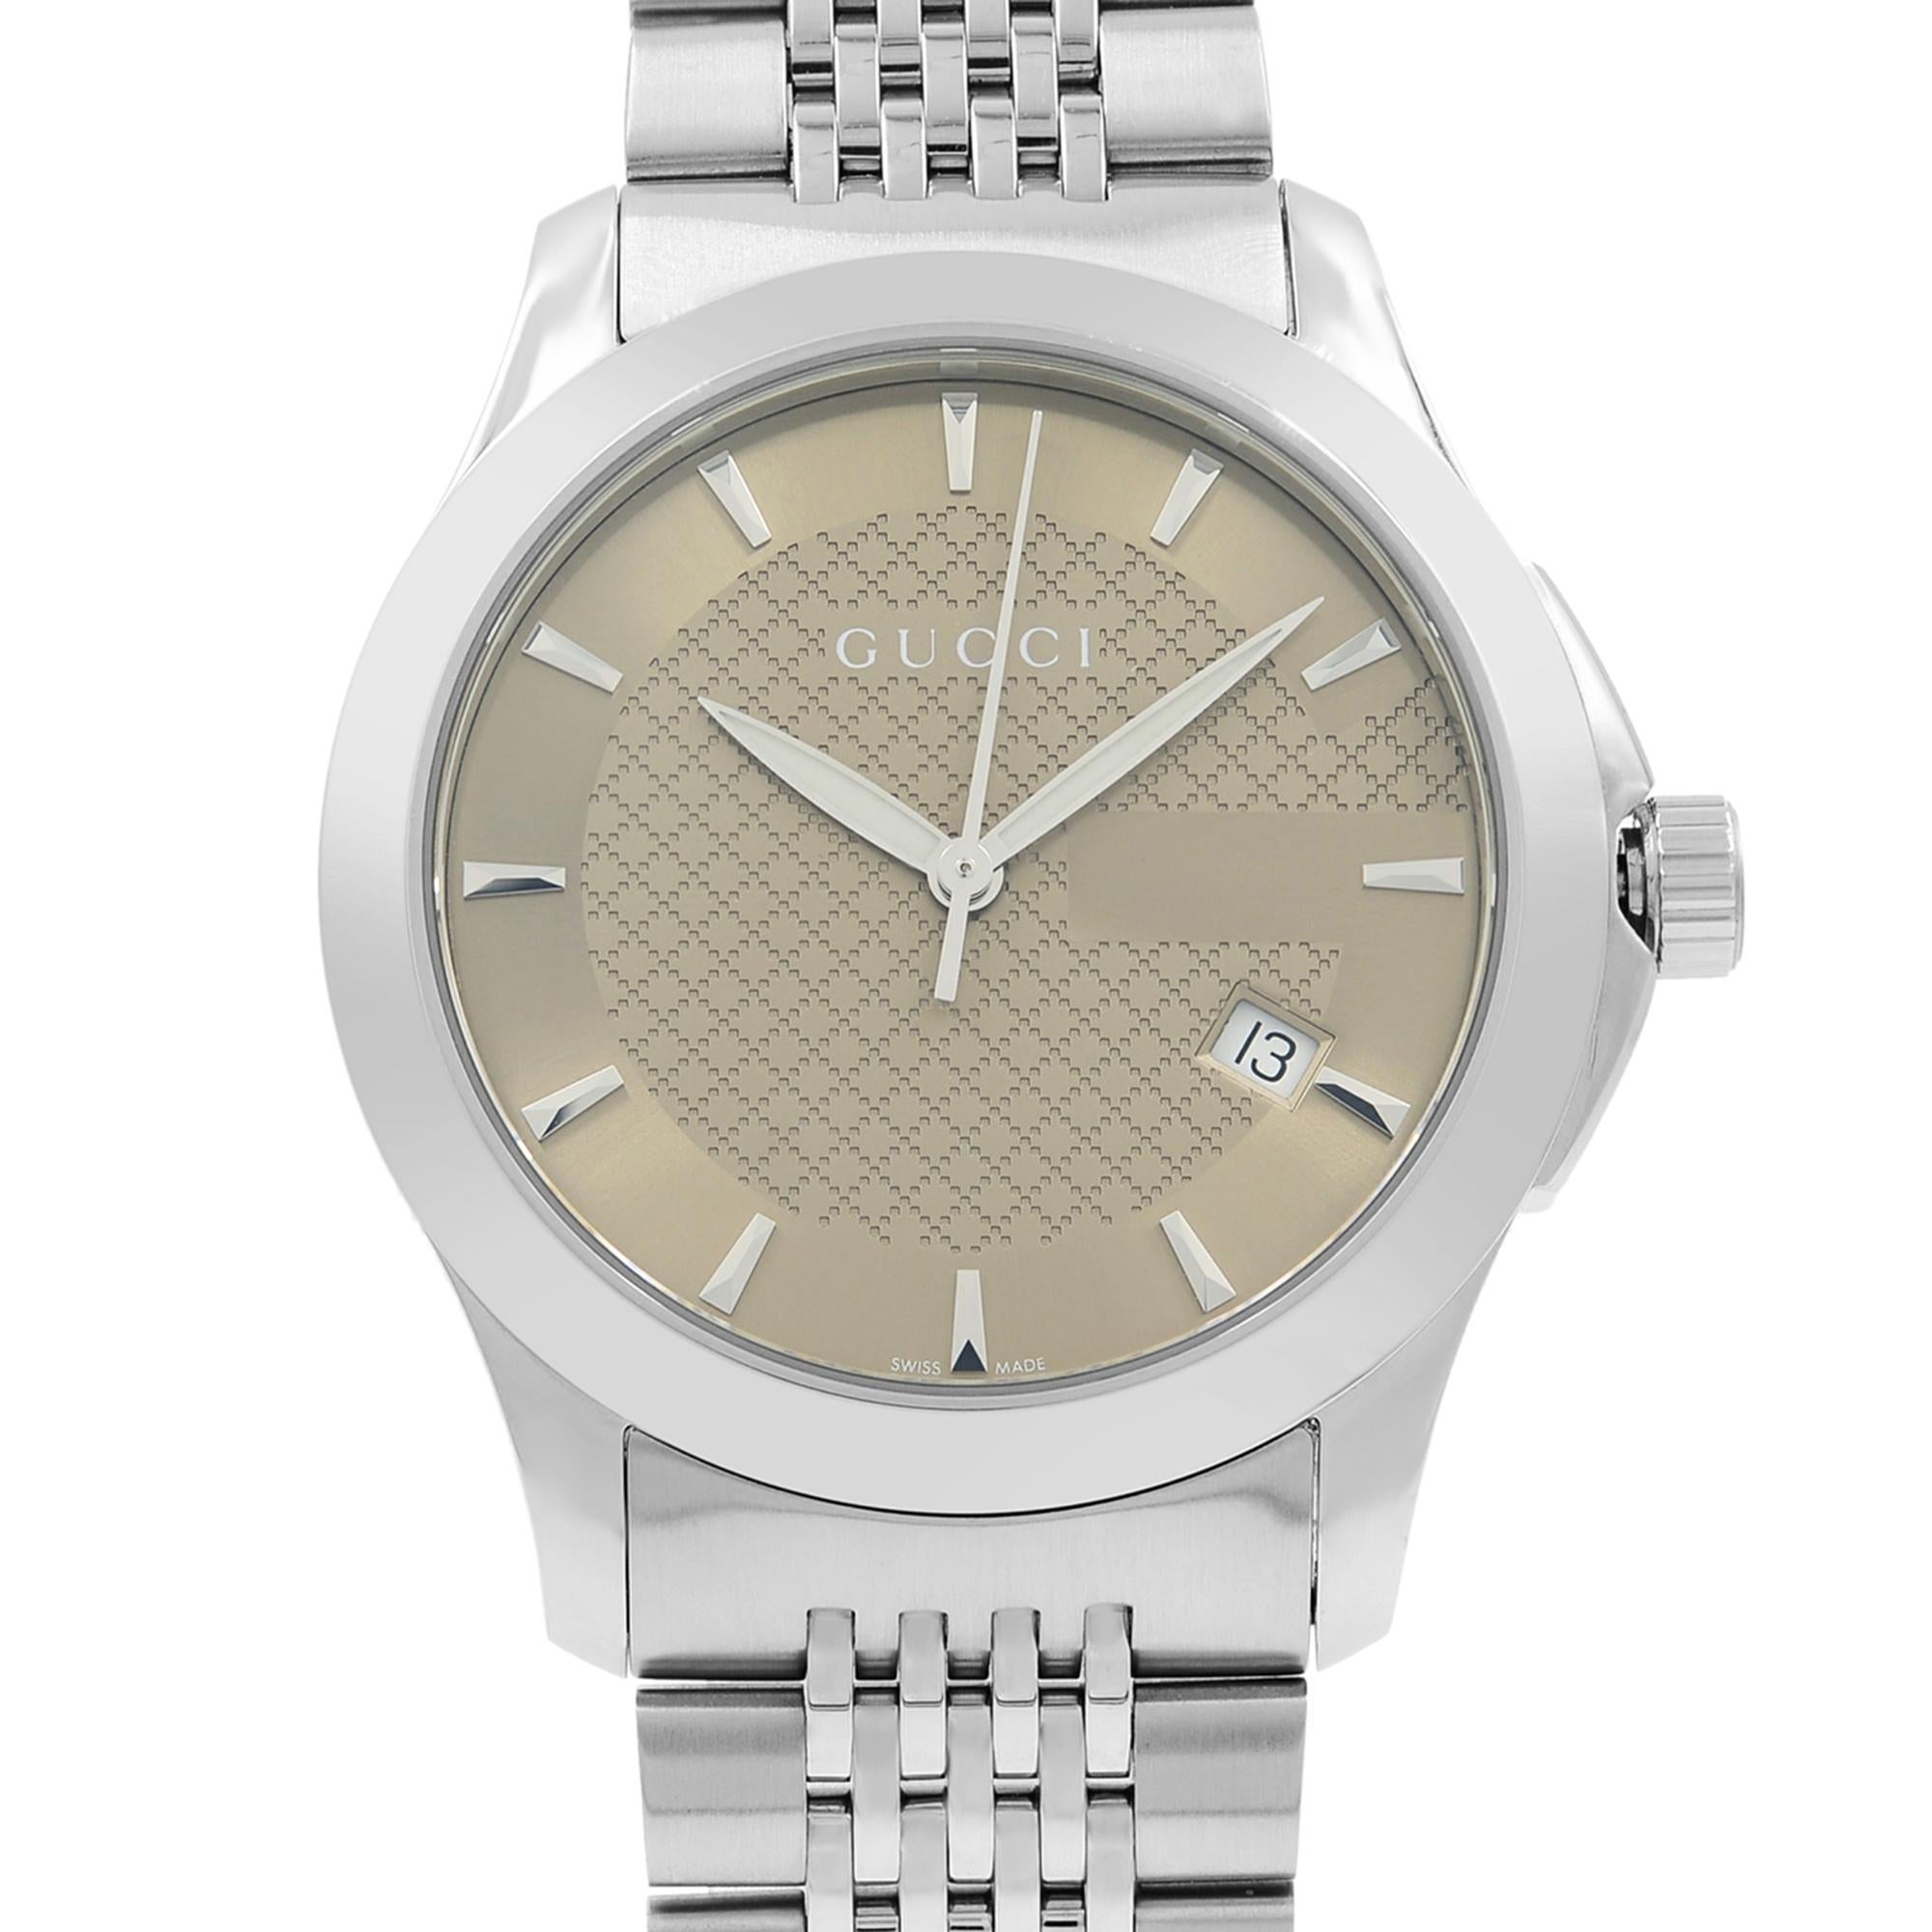 This display model Gucci G-Timeless YA126406 is a beautiful Ladies timepiece that is powered by a quartz movement which is cased in a stainless steel case. It has a round shape face, date dial and has hand sticks style markers. It is completed with